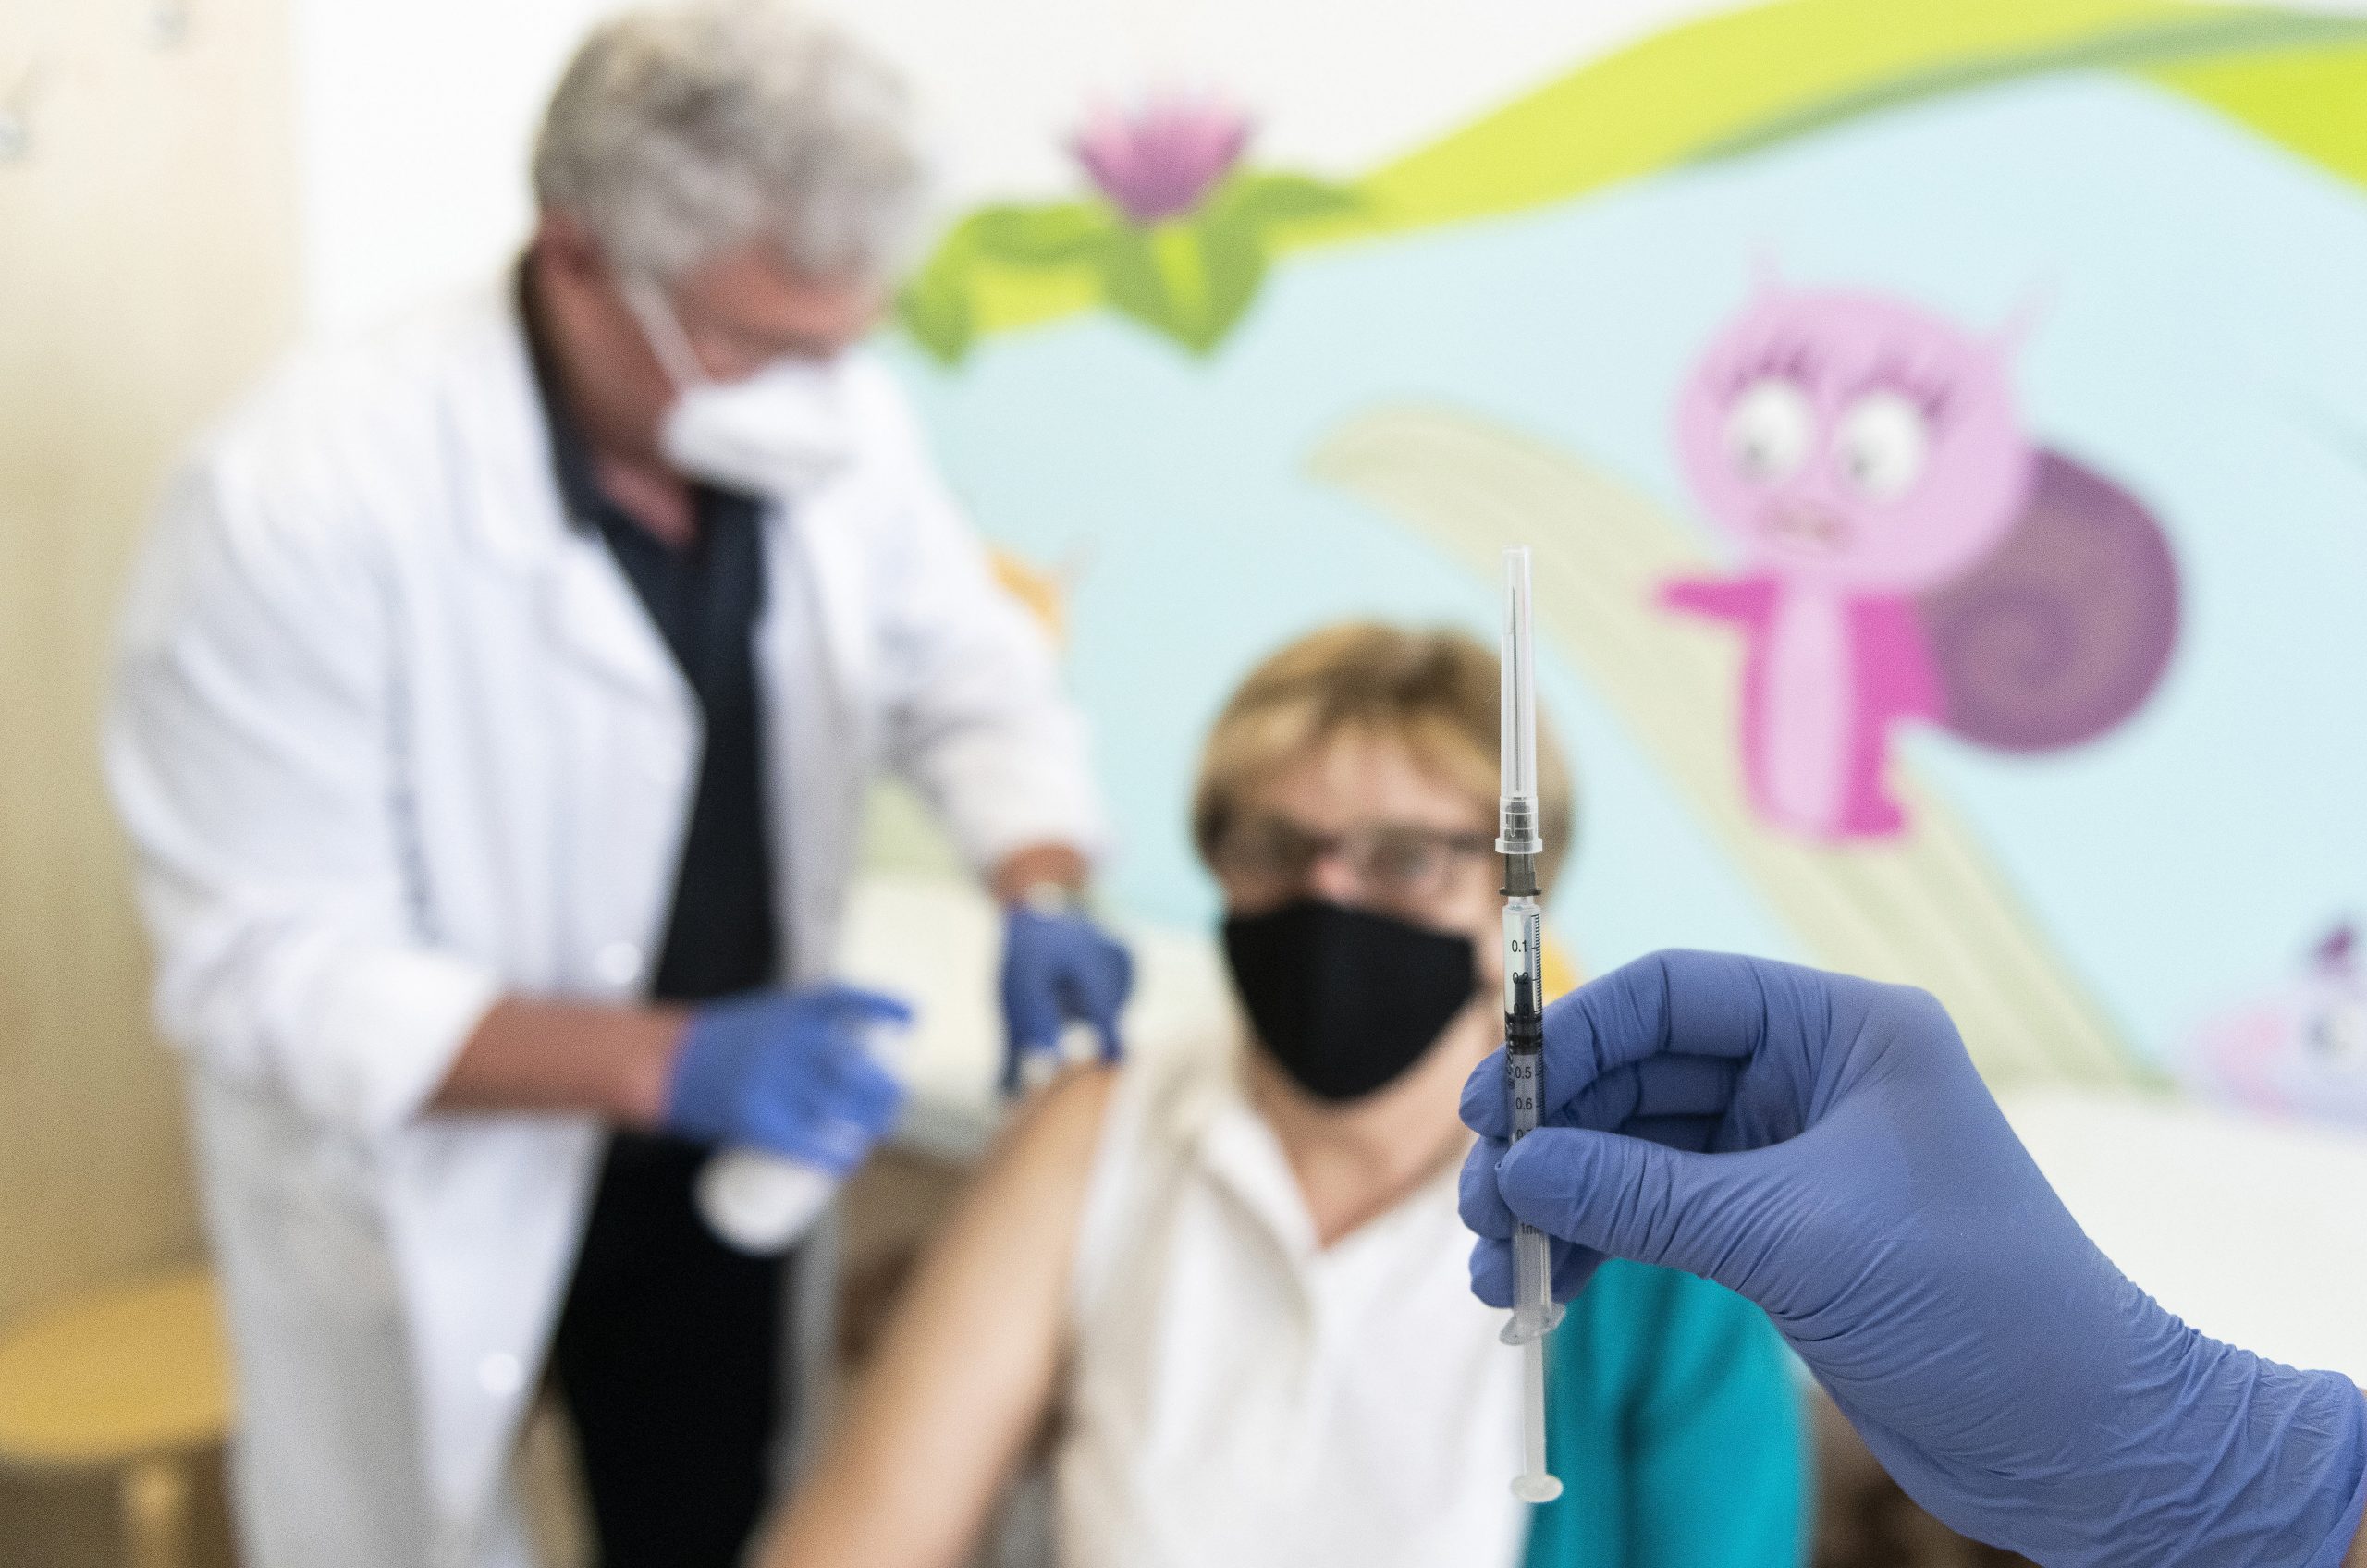 Five Million Vaccinated in Hungary Within Weeks?